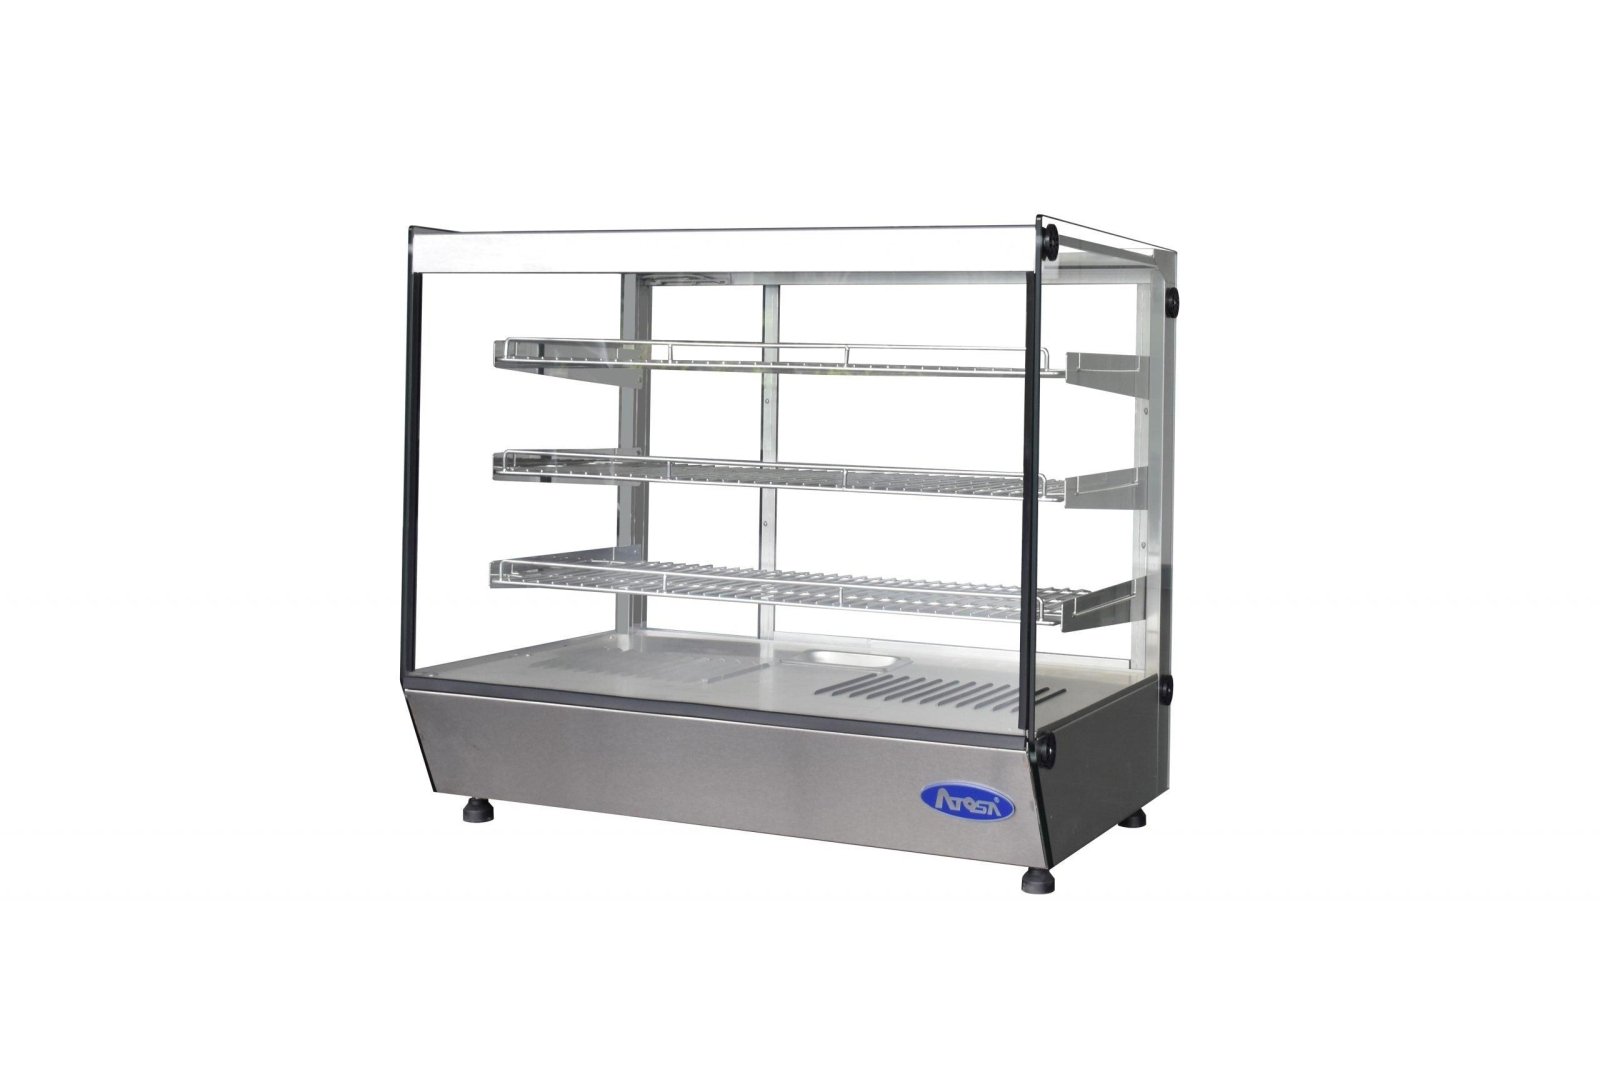 Atosa CHDS-53 Countertop Heated Square Display Case, 5.3 cu ft, 3 Stainless Steel Shelves - TheChefStore.Com